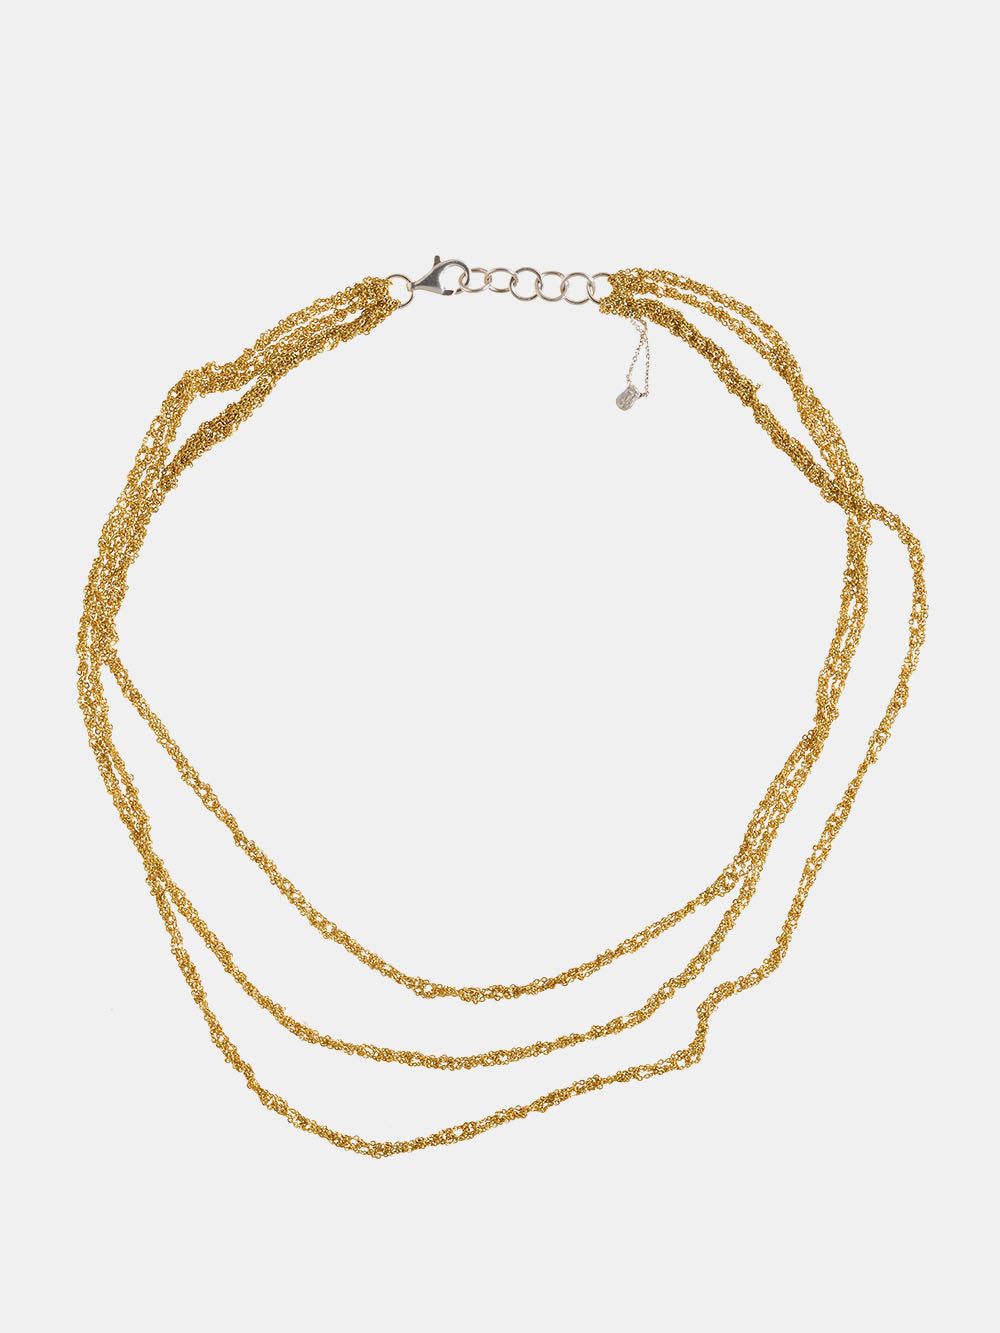 Arielle De Pinto 3-Tiered Simple Necklace in Gold